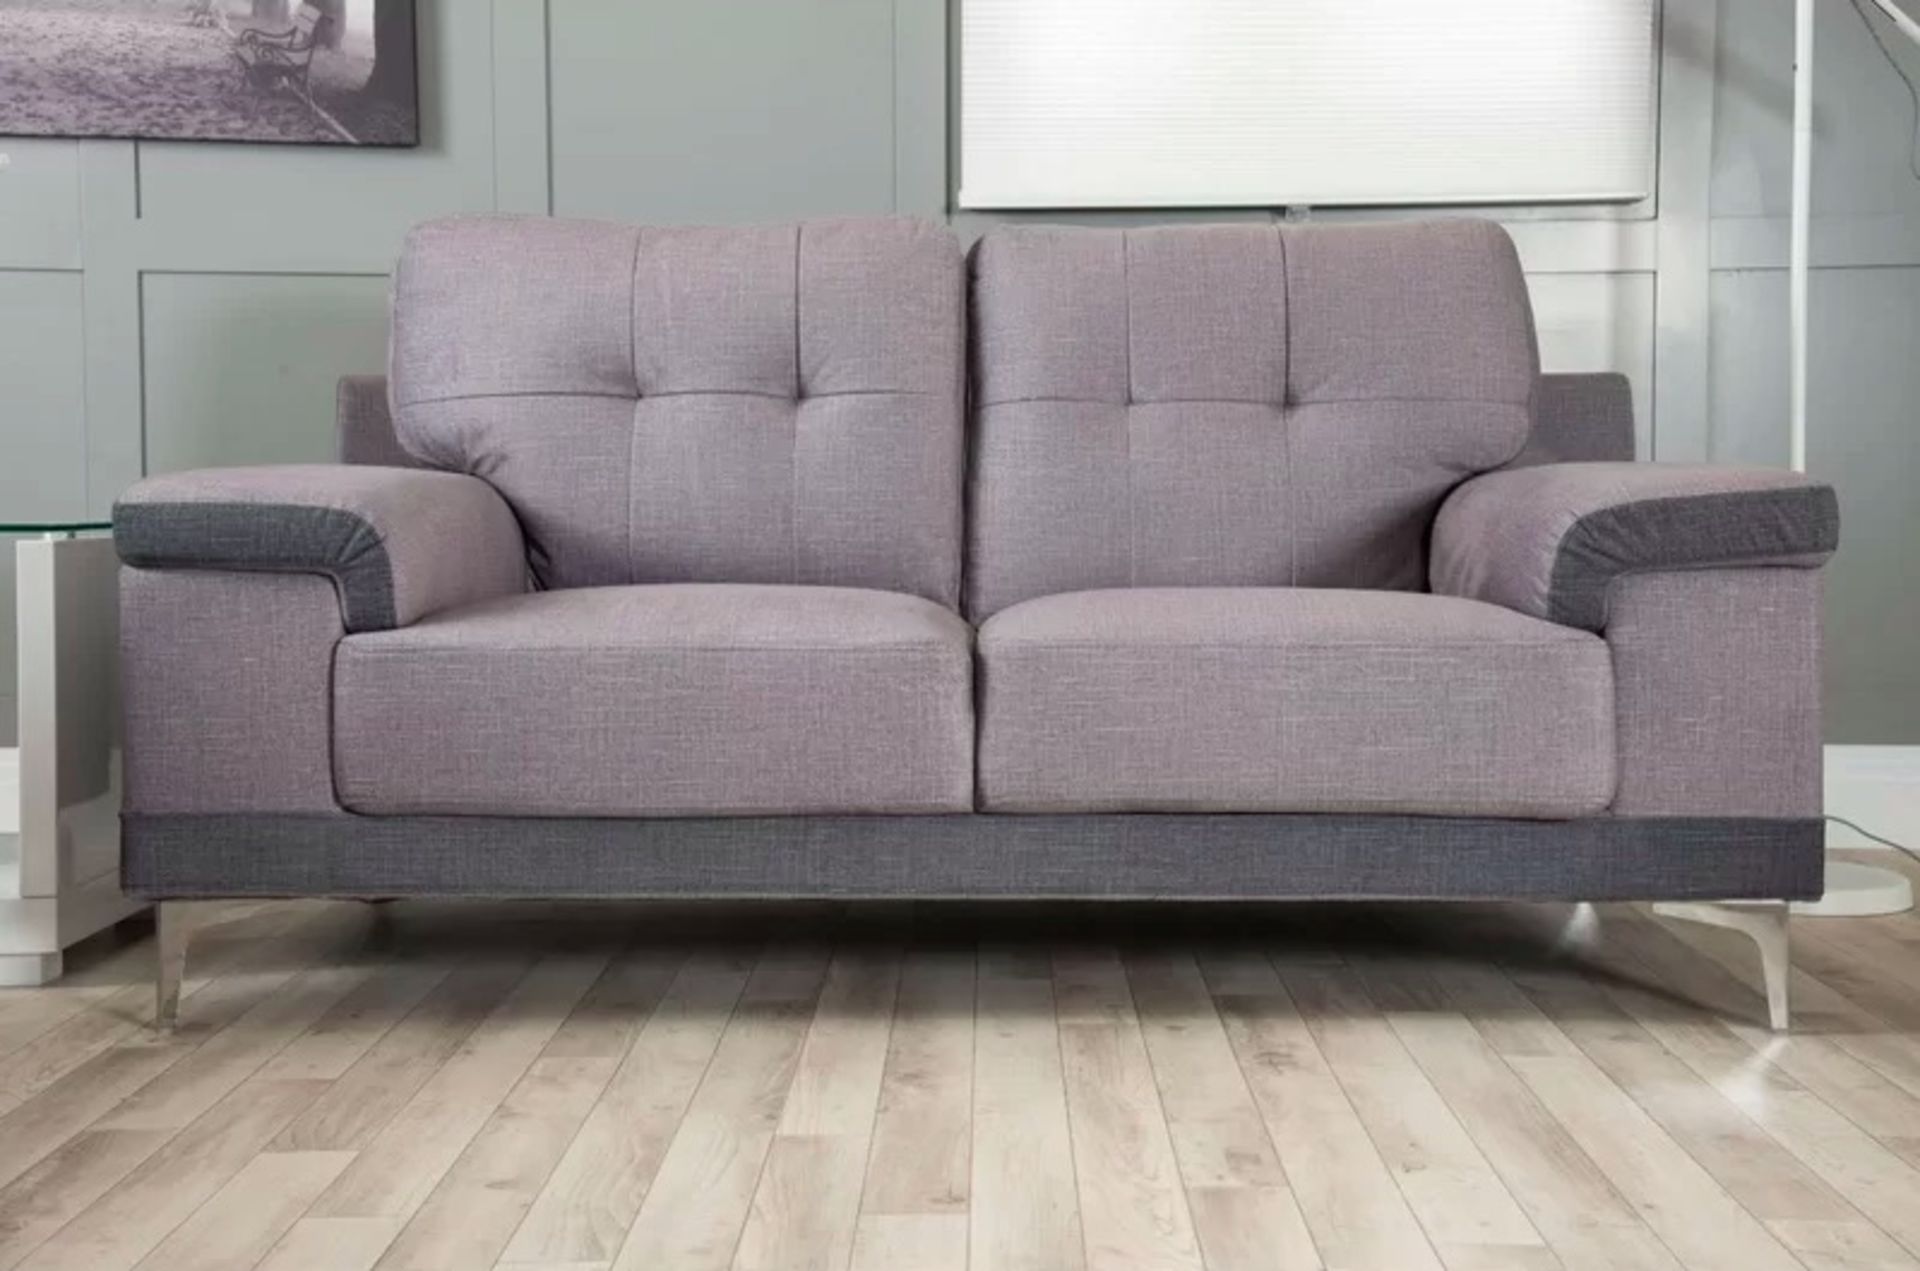 Deep Cushion 2 Seater Sofa Combining Modern Style With Affordability The 2 Seater Sofa Makes The